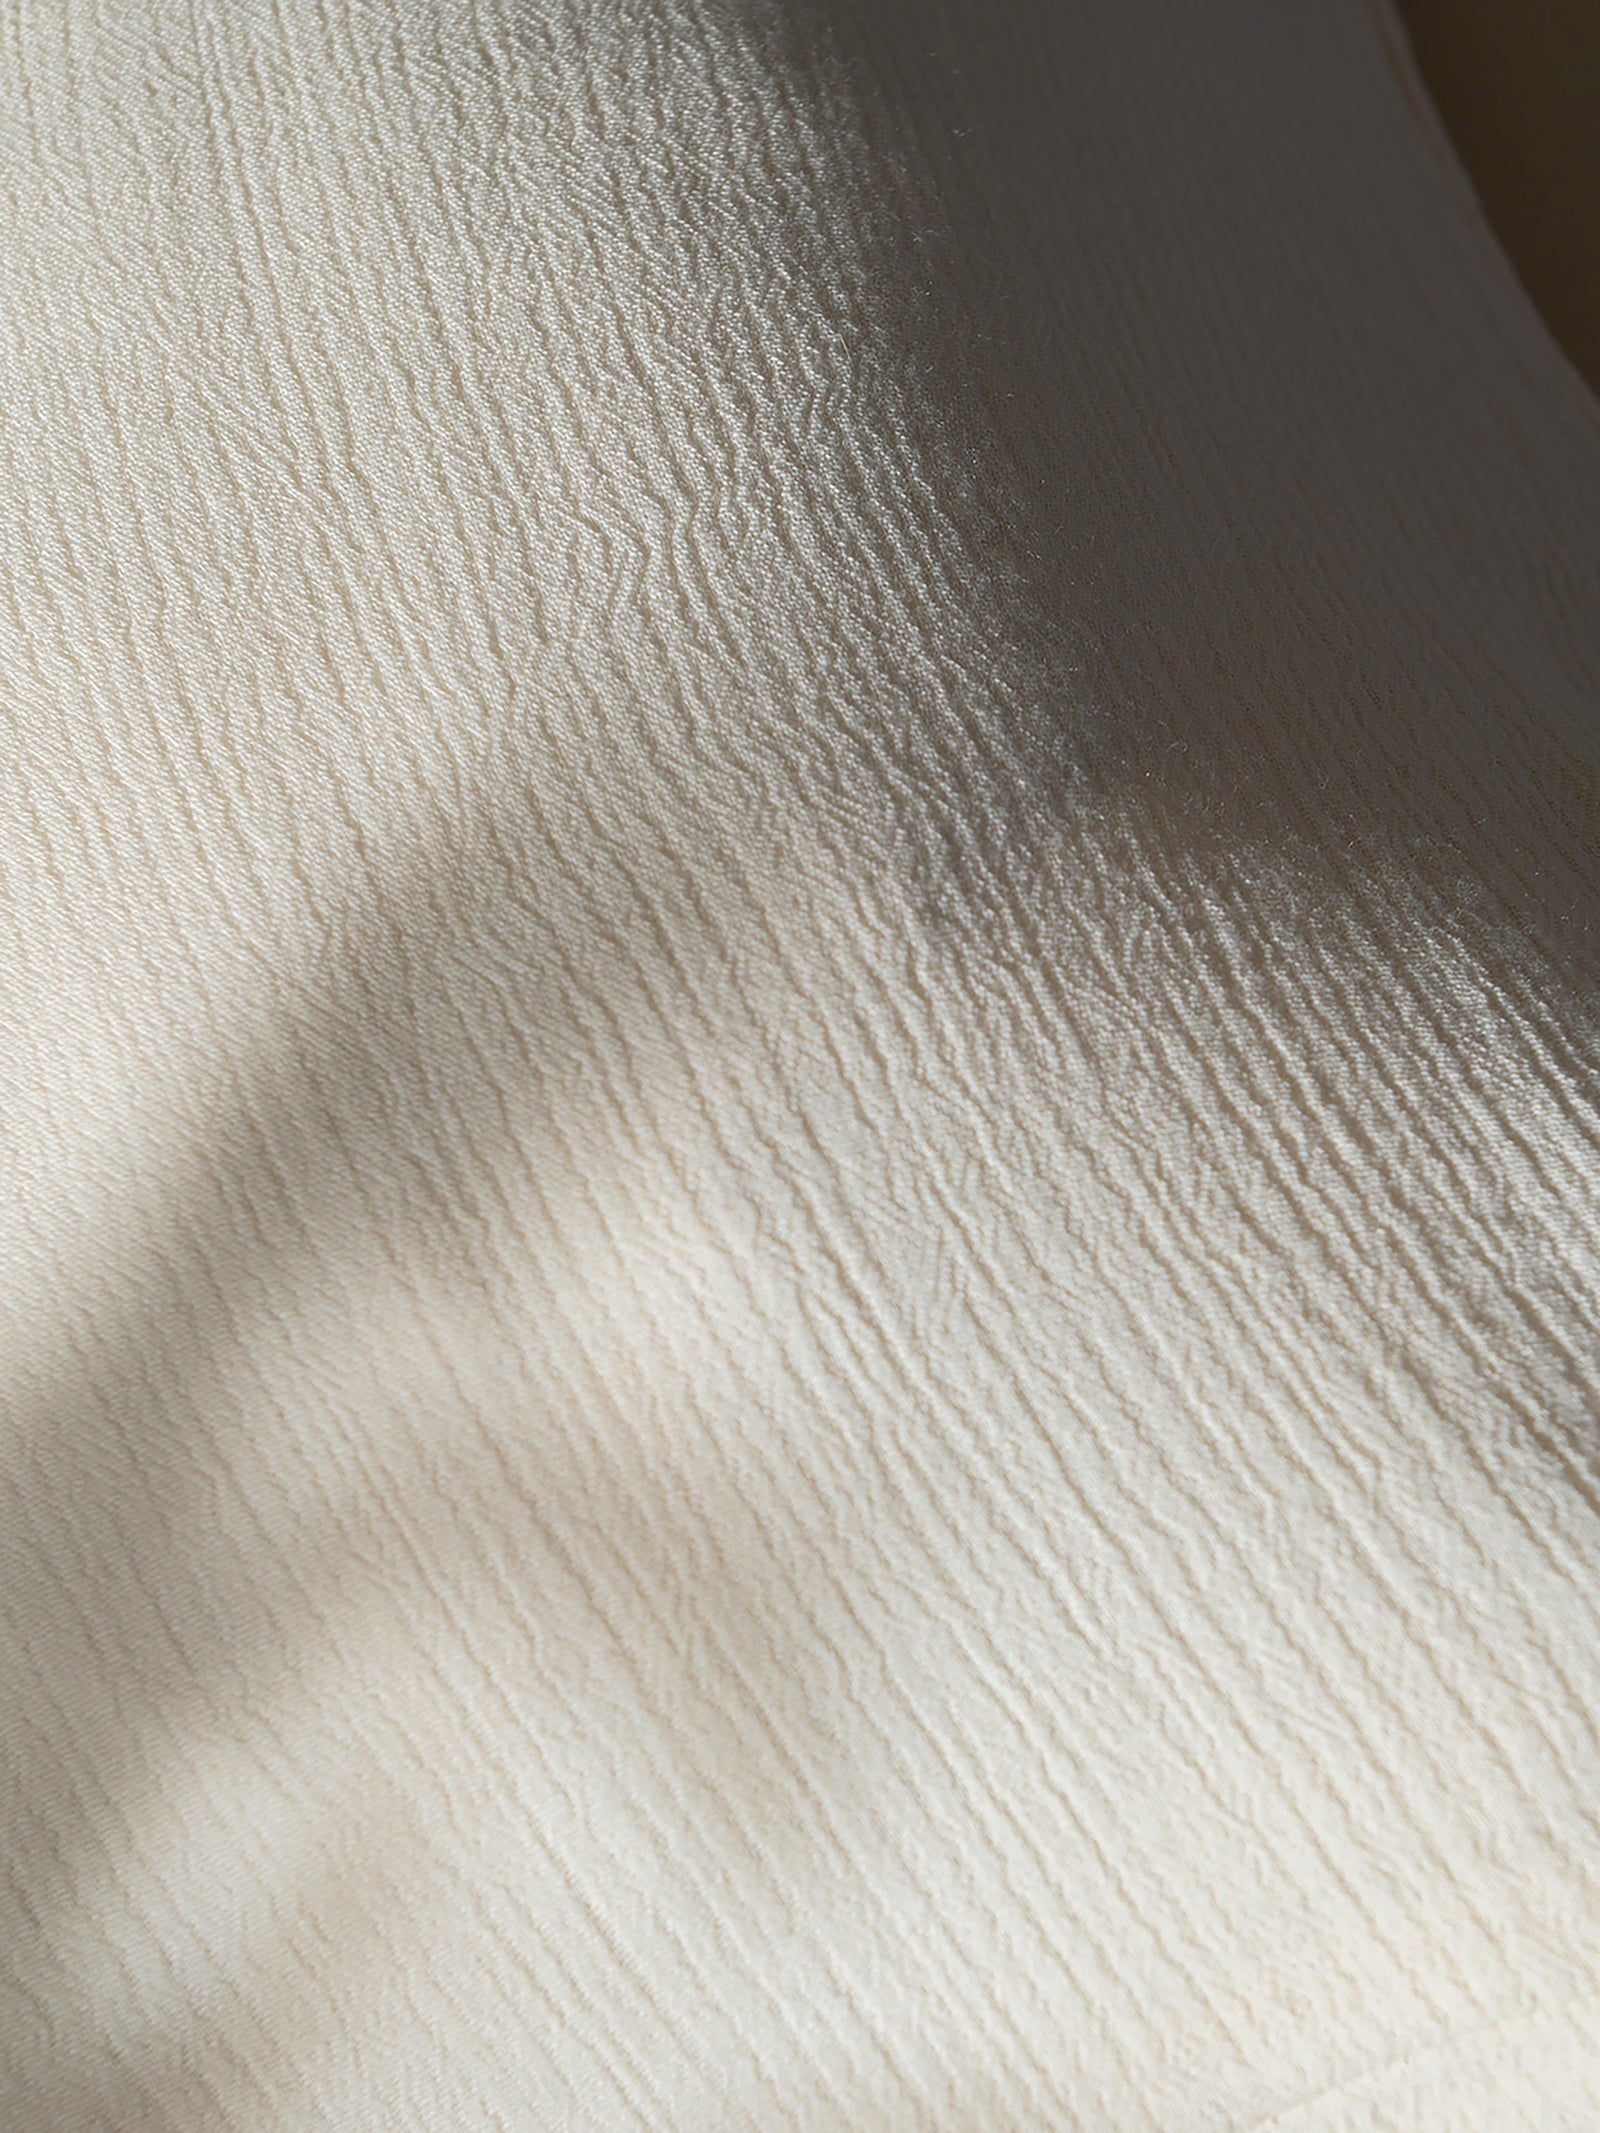 Close up of Buttermilk Aire Bamboo Sham. The sham is photographed close up resting on a bed